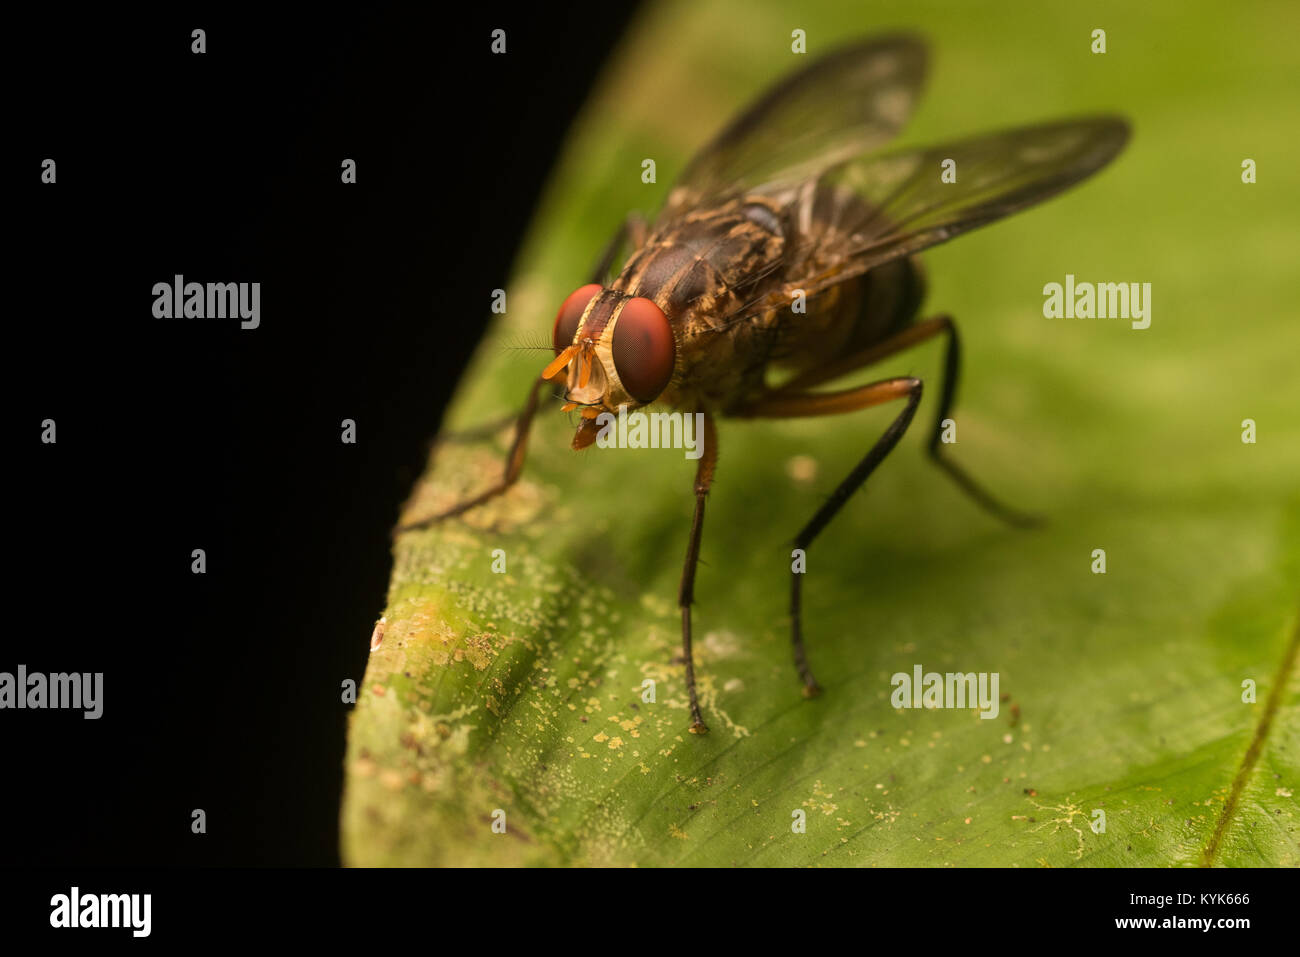 Some sort of fly from the Amazon rainforest. Stock Photo